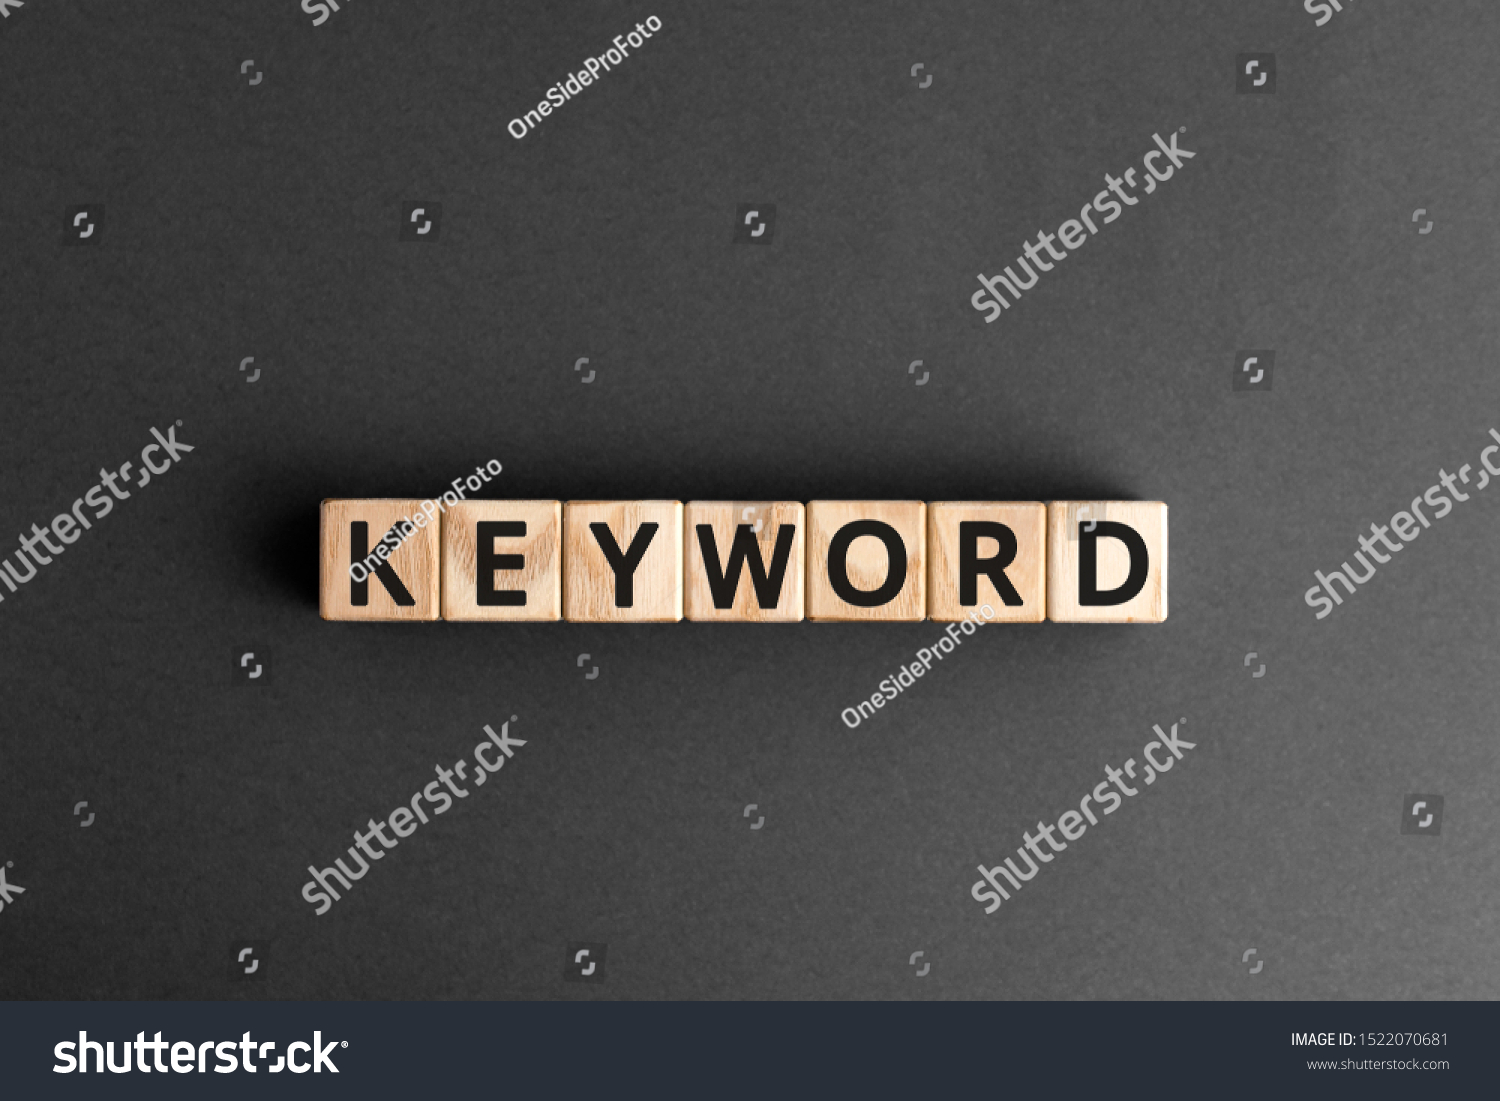 Keyword - word from wooden blocks with letters, search information that contains that word keyword concept, random letters around, white  background #1522070681